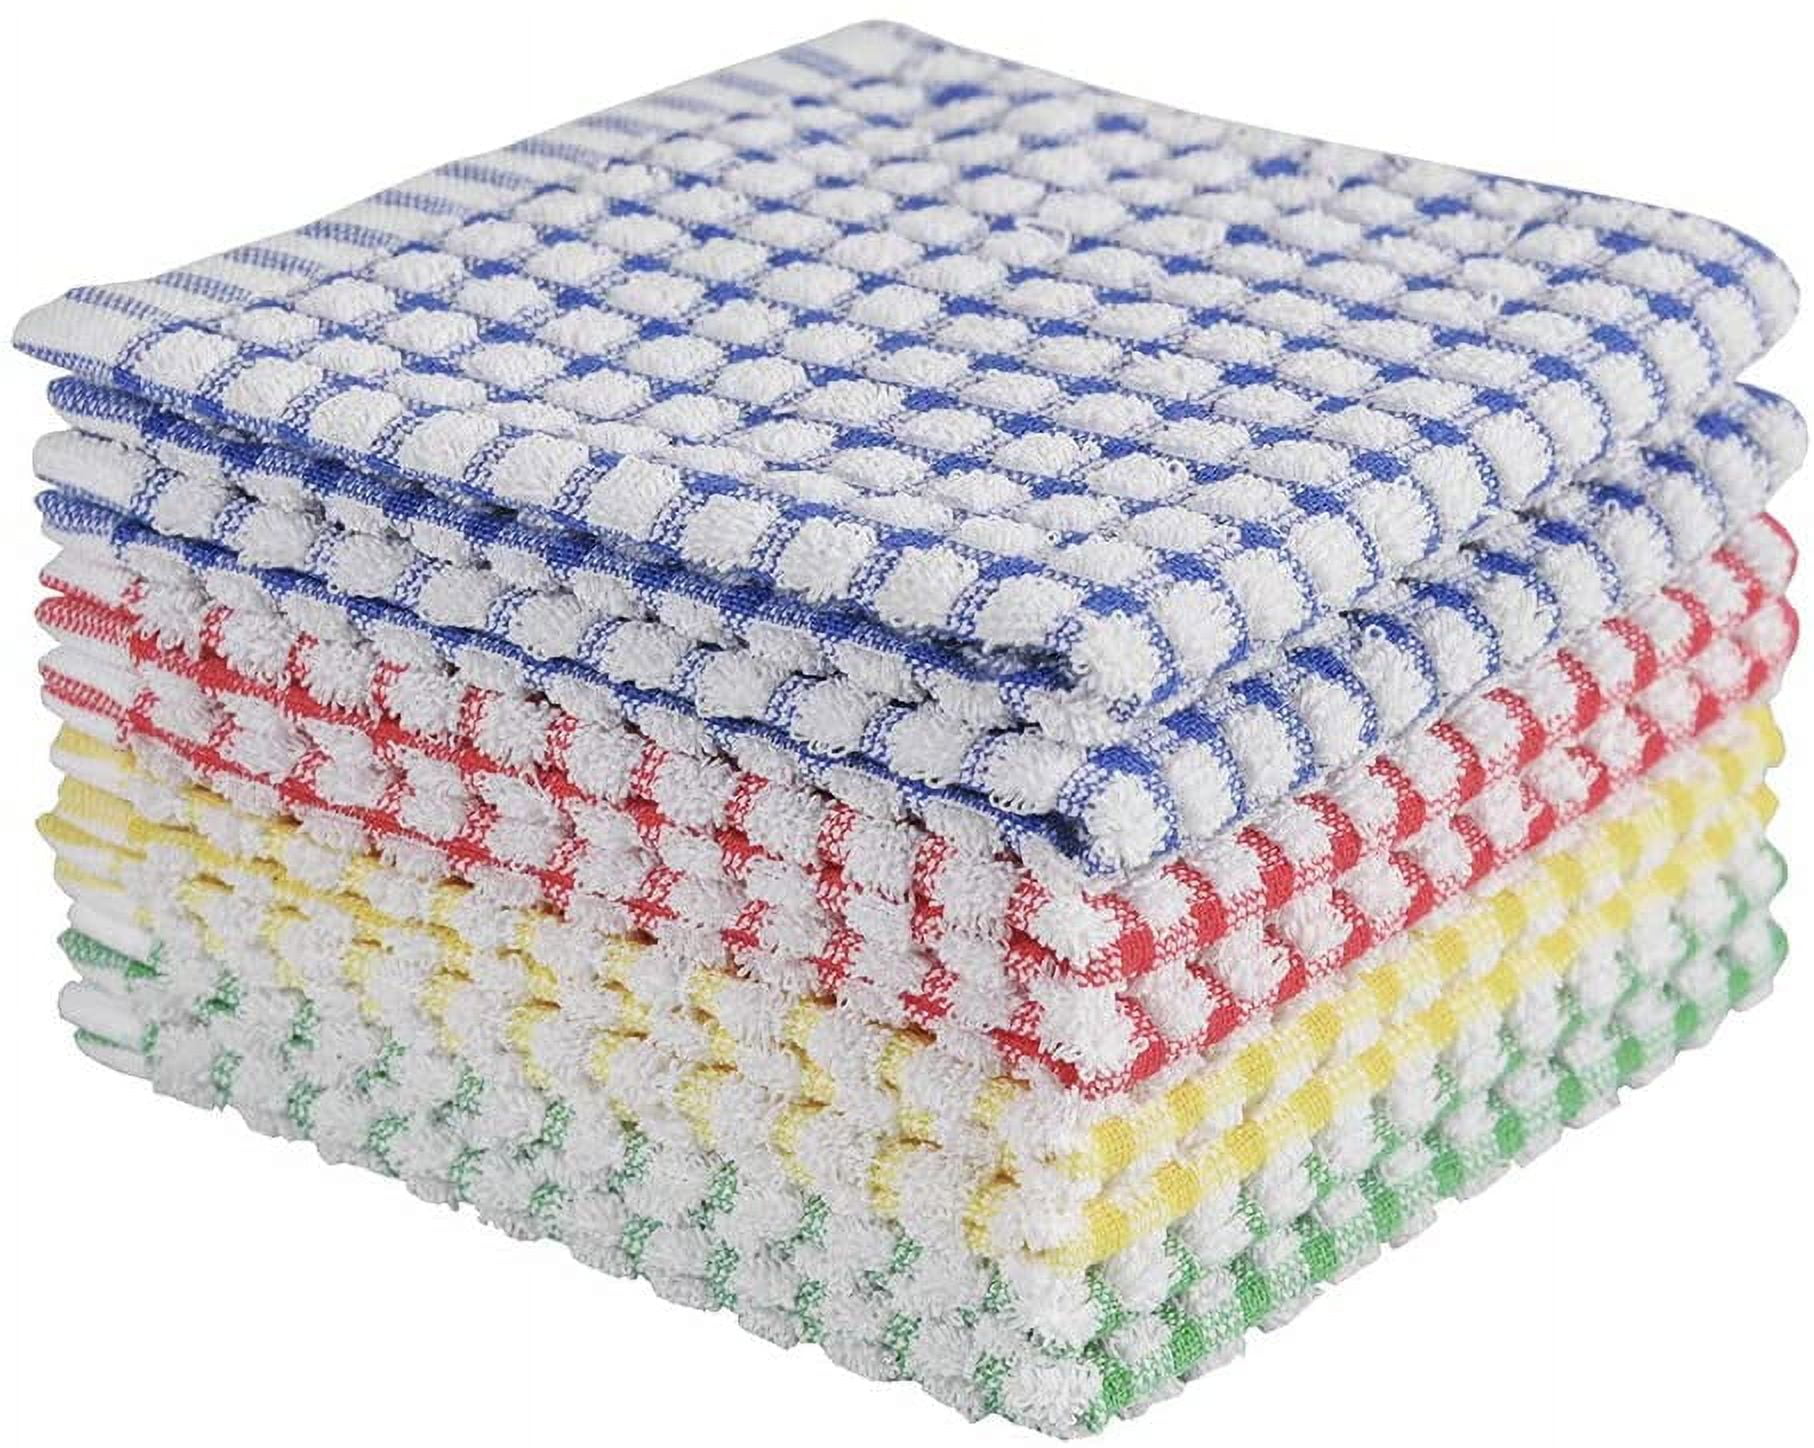 Howarmer Set of 8 Blue Kitchen Towels, Super Soft and Absorbent Dish Cloths for Washing Dishes, 12 inch x 12 inch, Size: 12×12